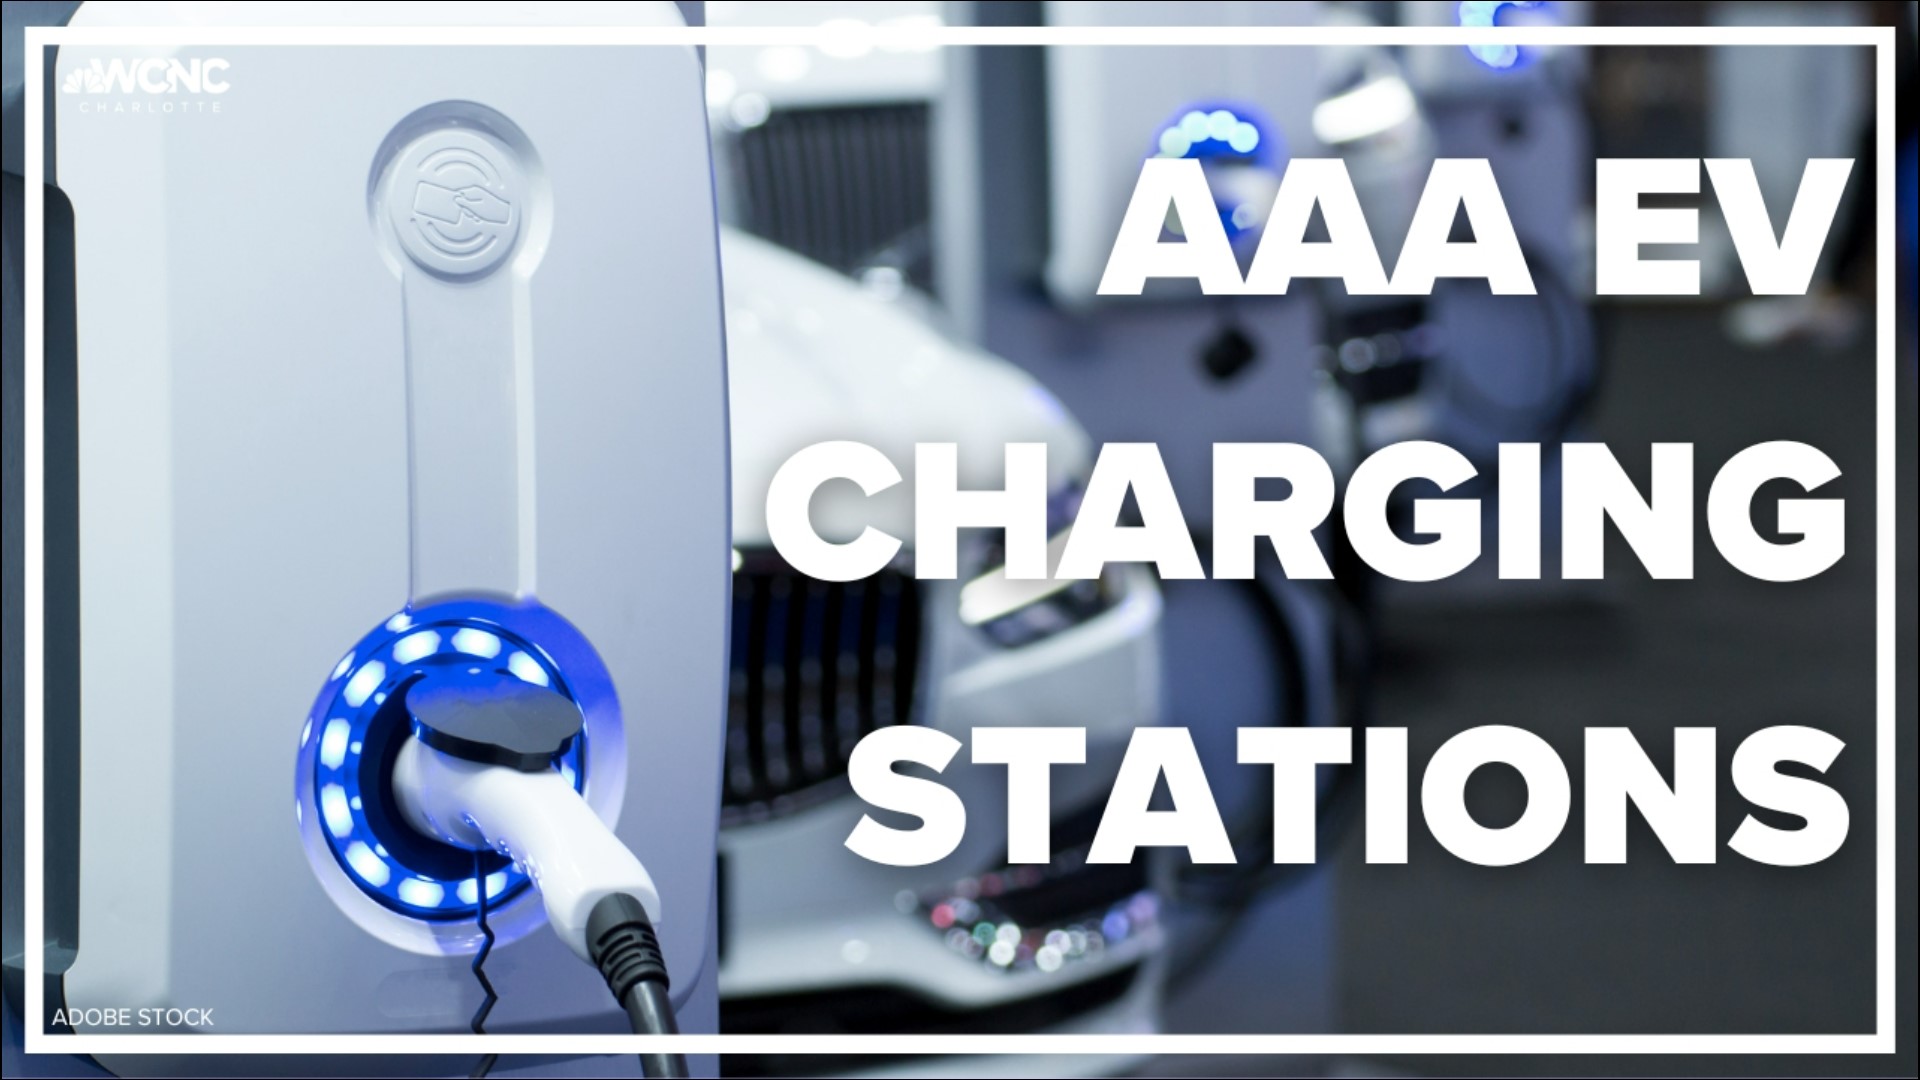 AAA is expanding its auto services for EV vehicle owners in Charlotte.